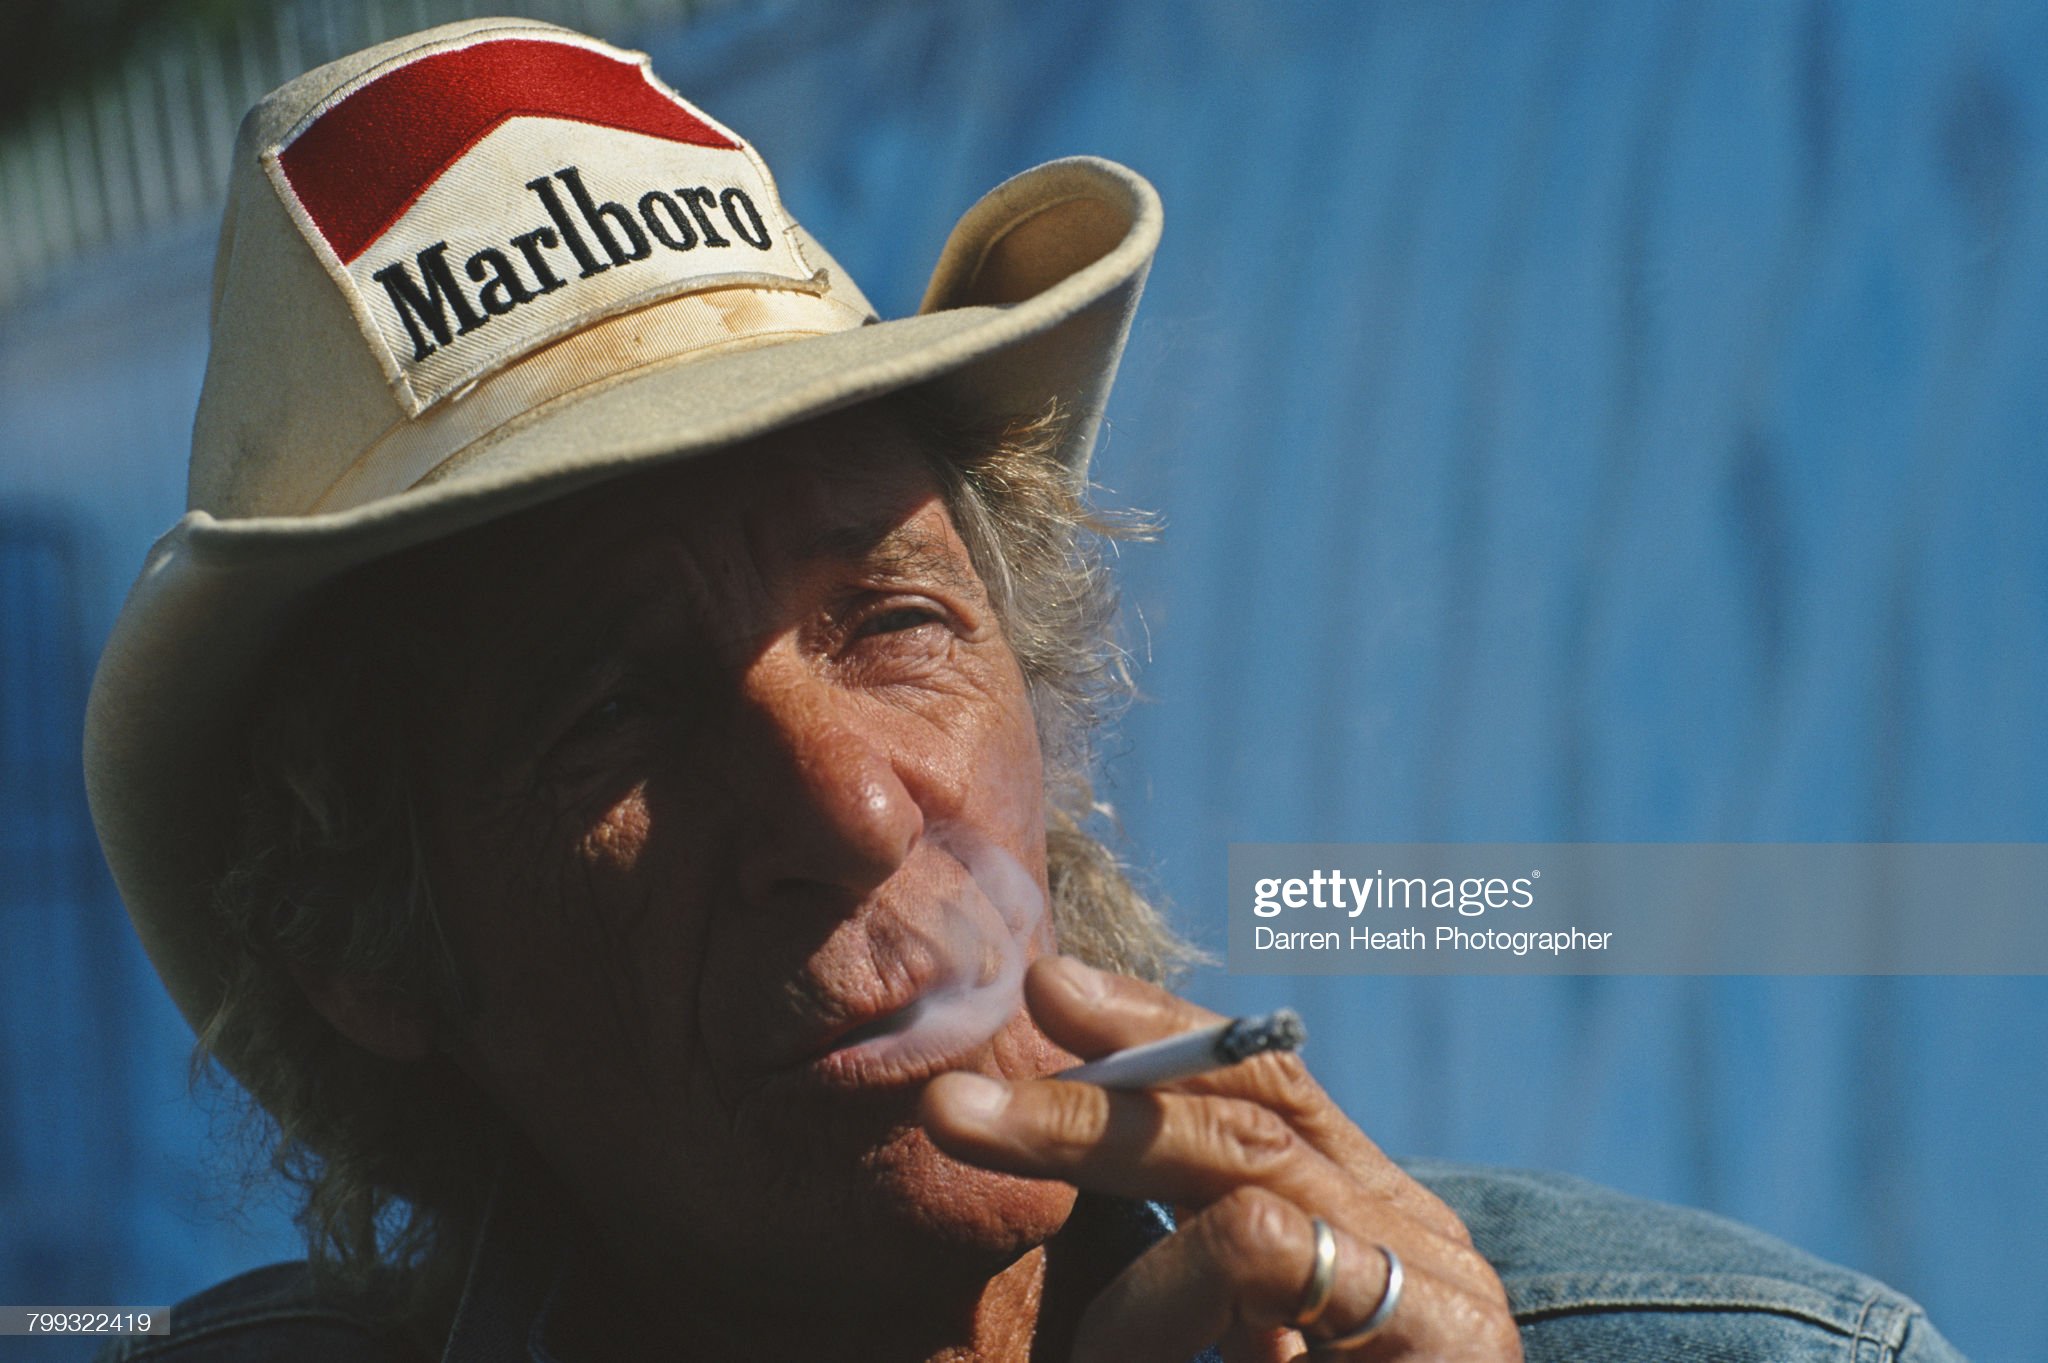 Arturo Merzario smokes a cigarette whilst wearing his trademark Stetson cowboy hat with sponsorship patches from Marlboro during the Formula One Italian Grand Prix on 16 September 2001 at Monza. 